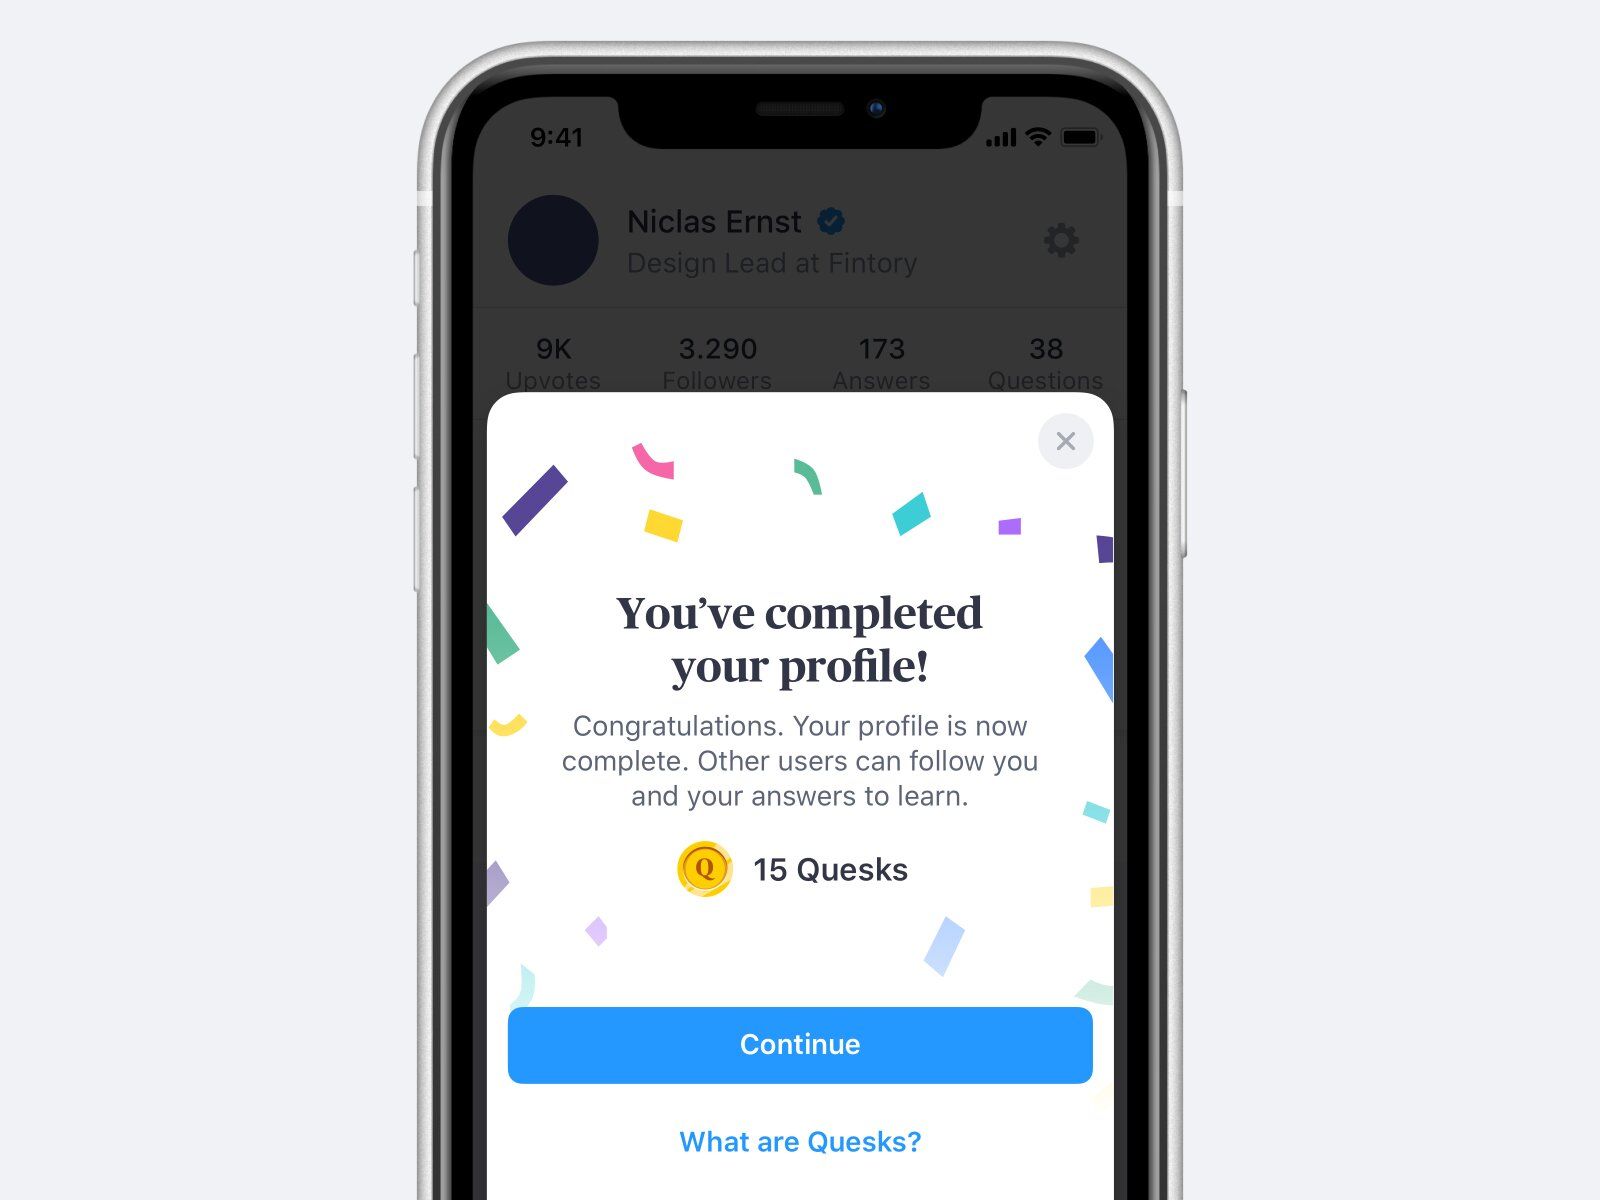 e-Learning market is getting modified with similar gamification features on platforms so users get additional value (*image by [Niclas Ernst](https://dribbble.com/niclasernst){ rel="nofollow" .default-md}*)